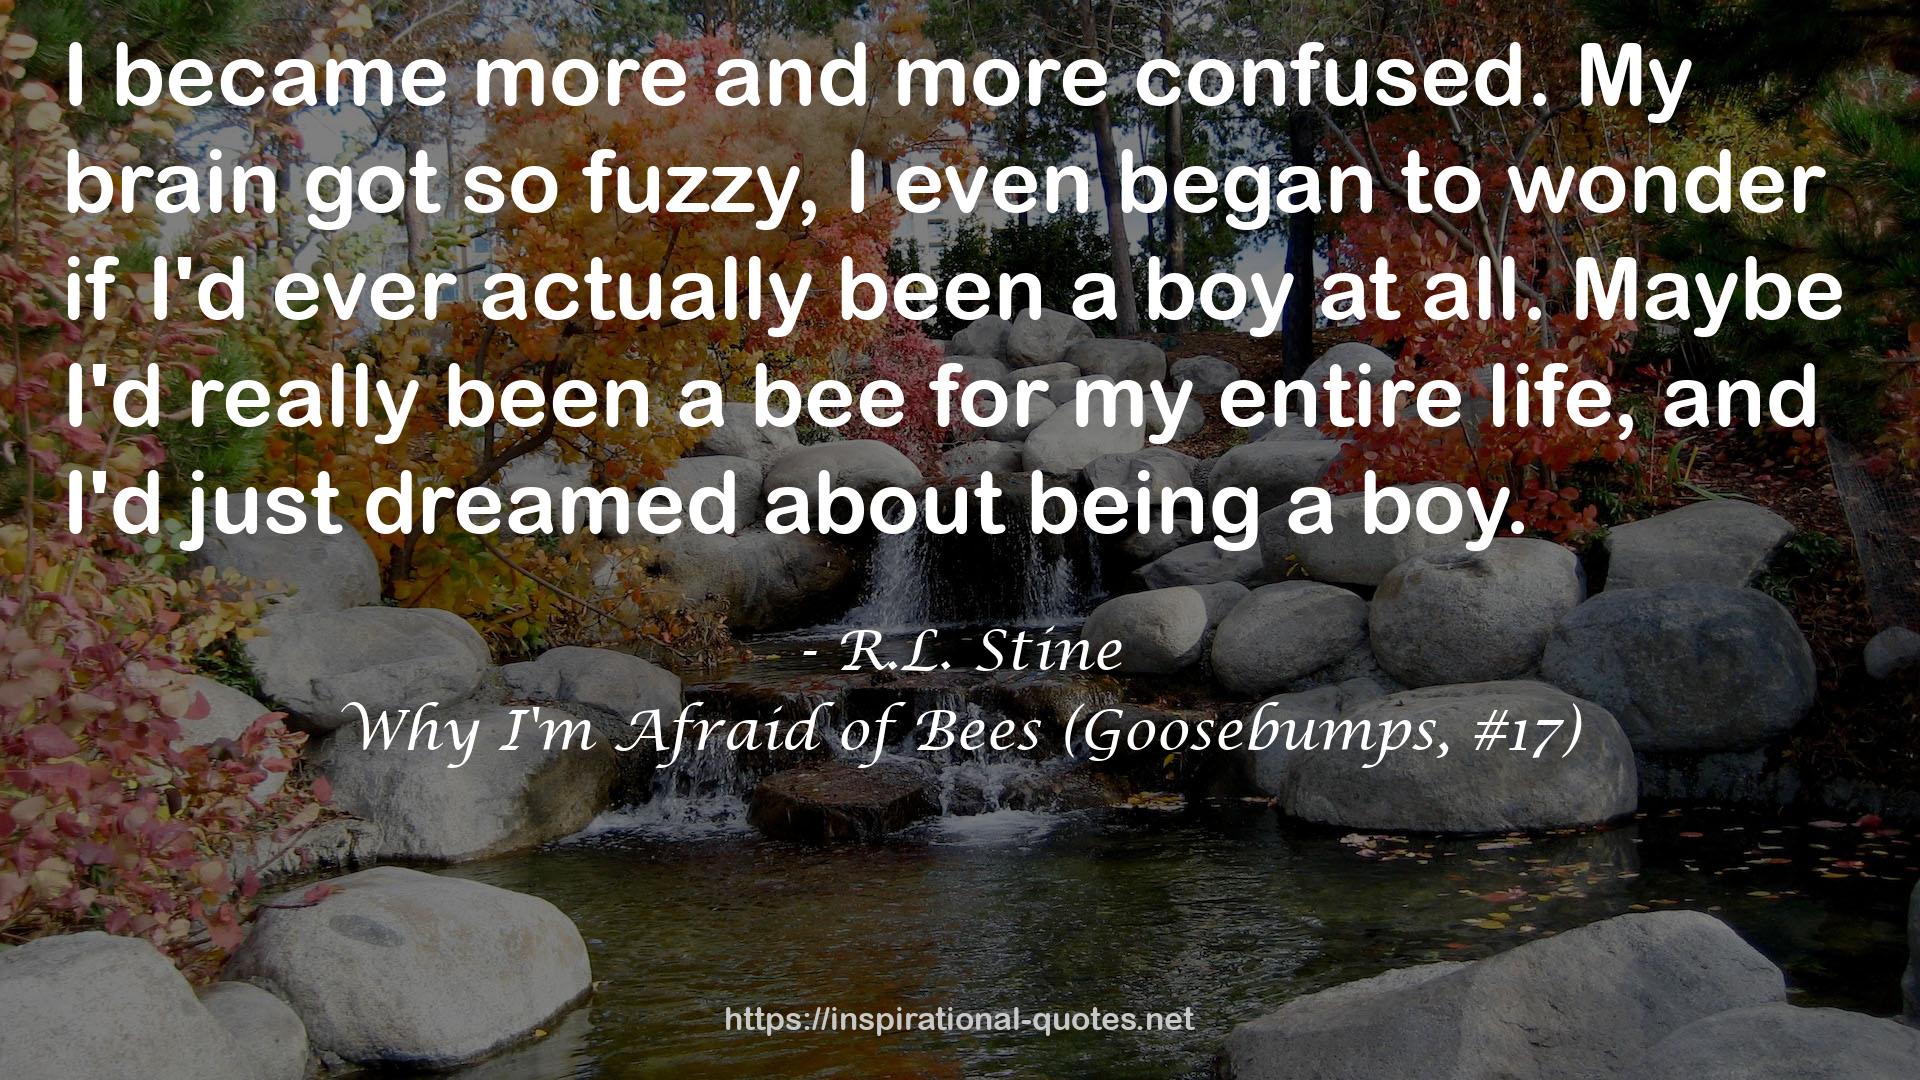 Why I'm Afraid of Bees (Goosebumps, #17) QUOTES